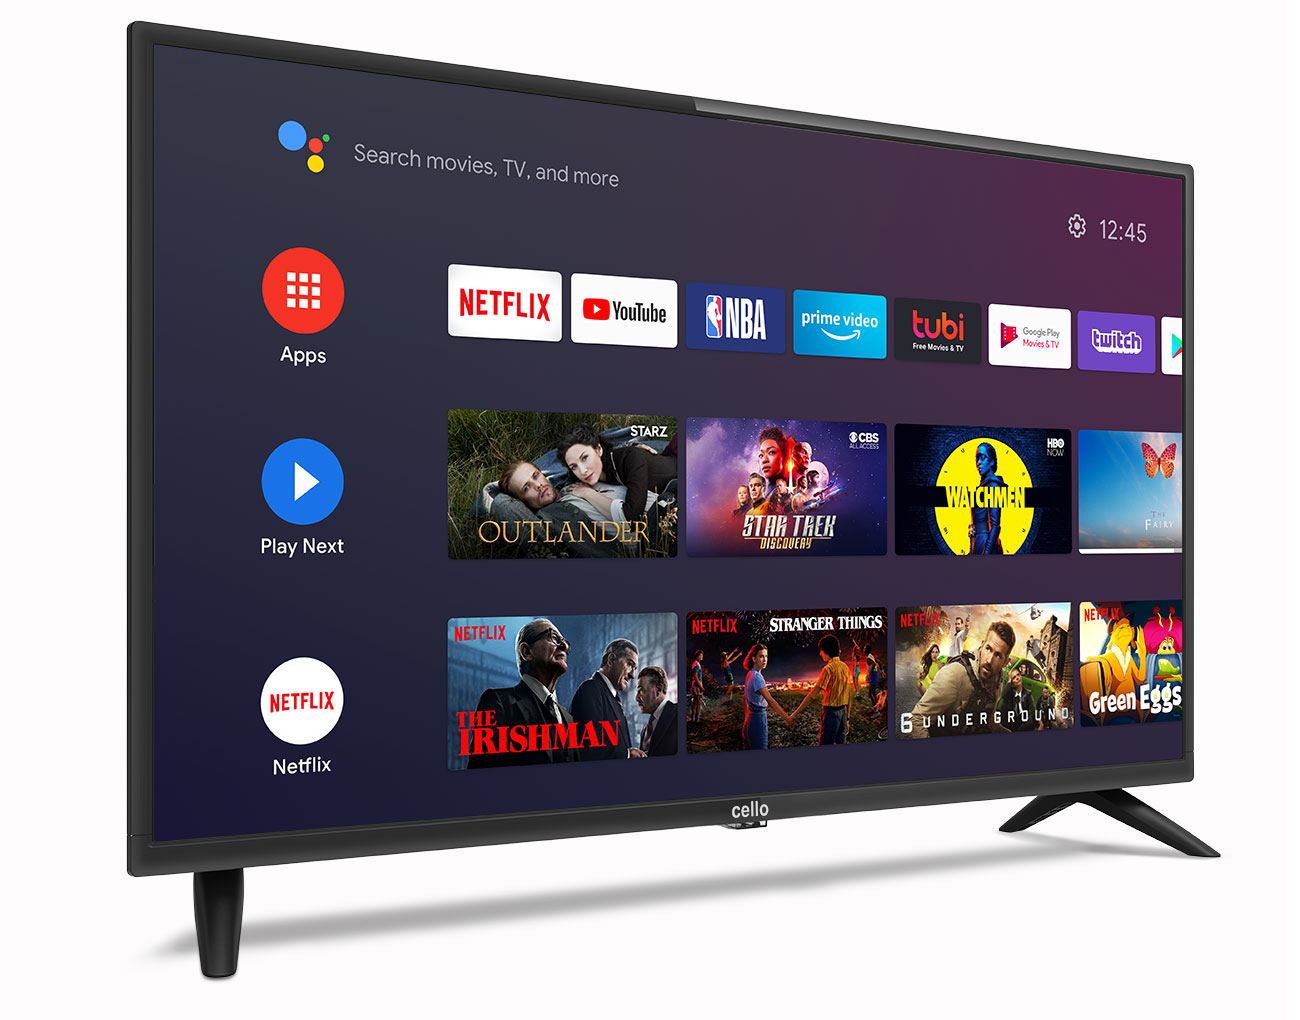 Gambar TV Android Digital-Tec - 32 inch Smart Android TV with Google Assistant and Freeview Play